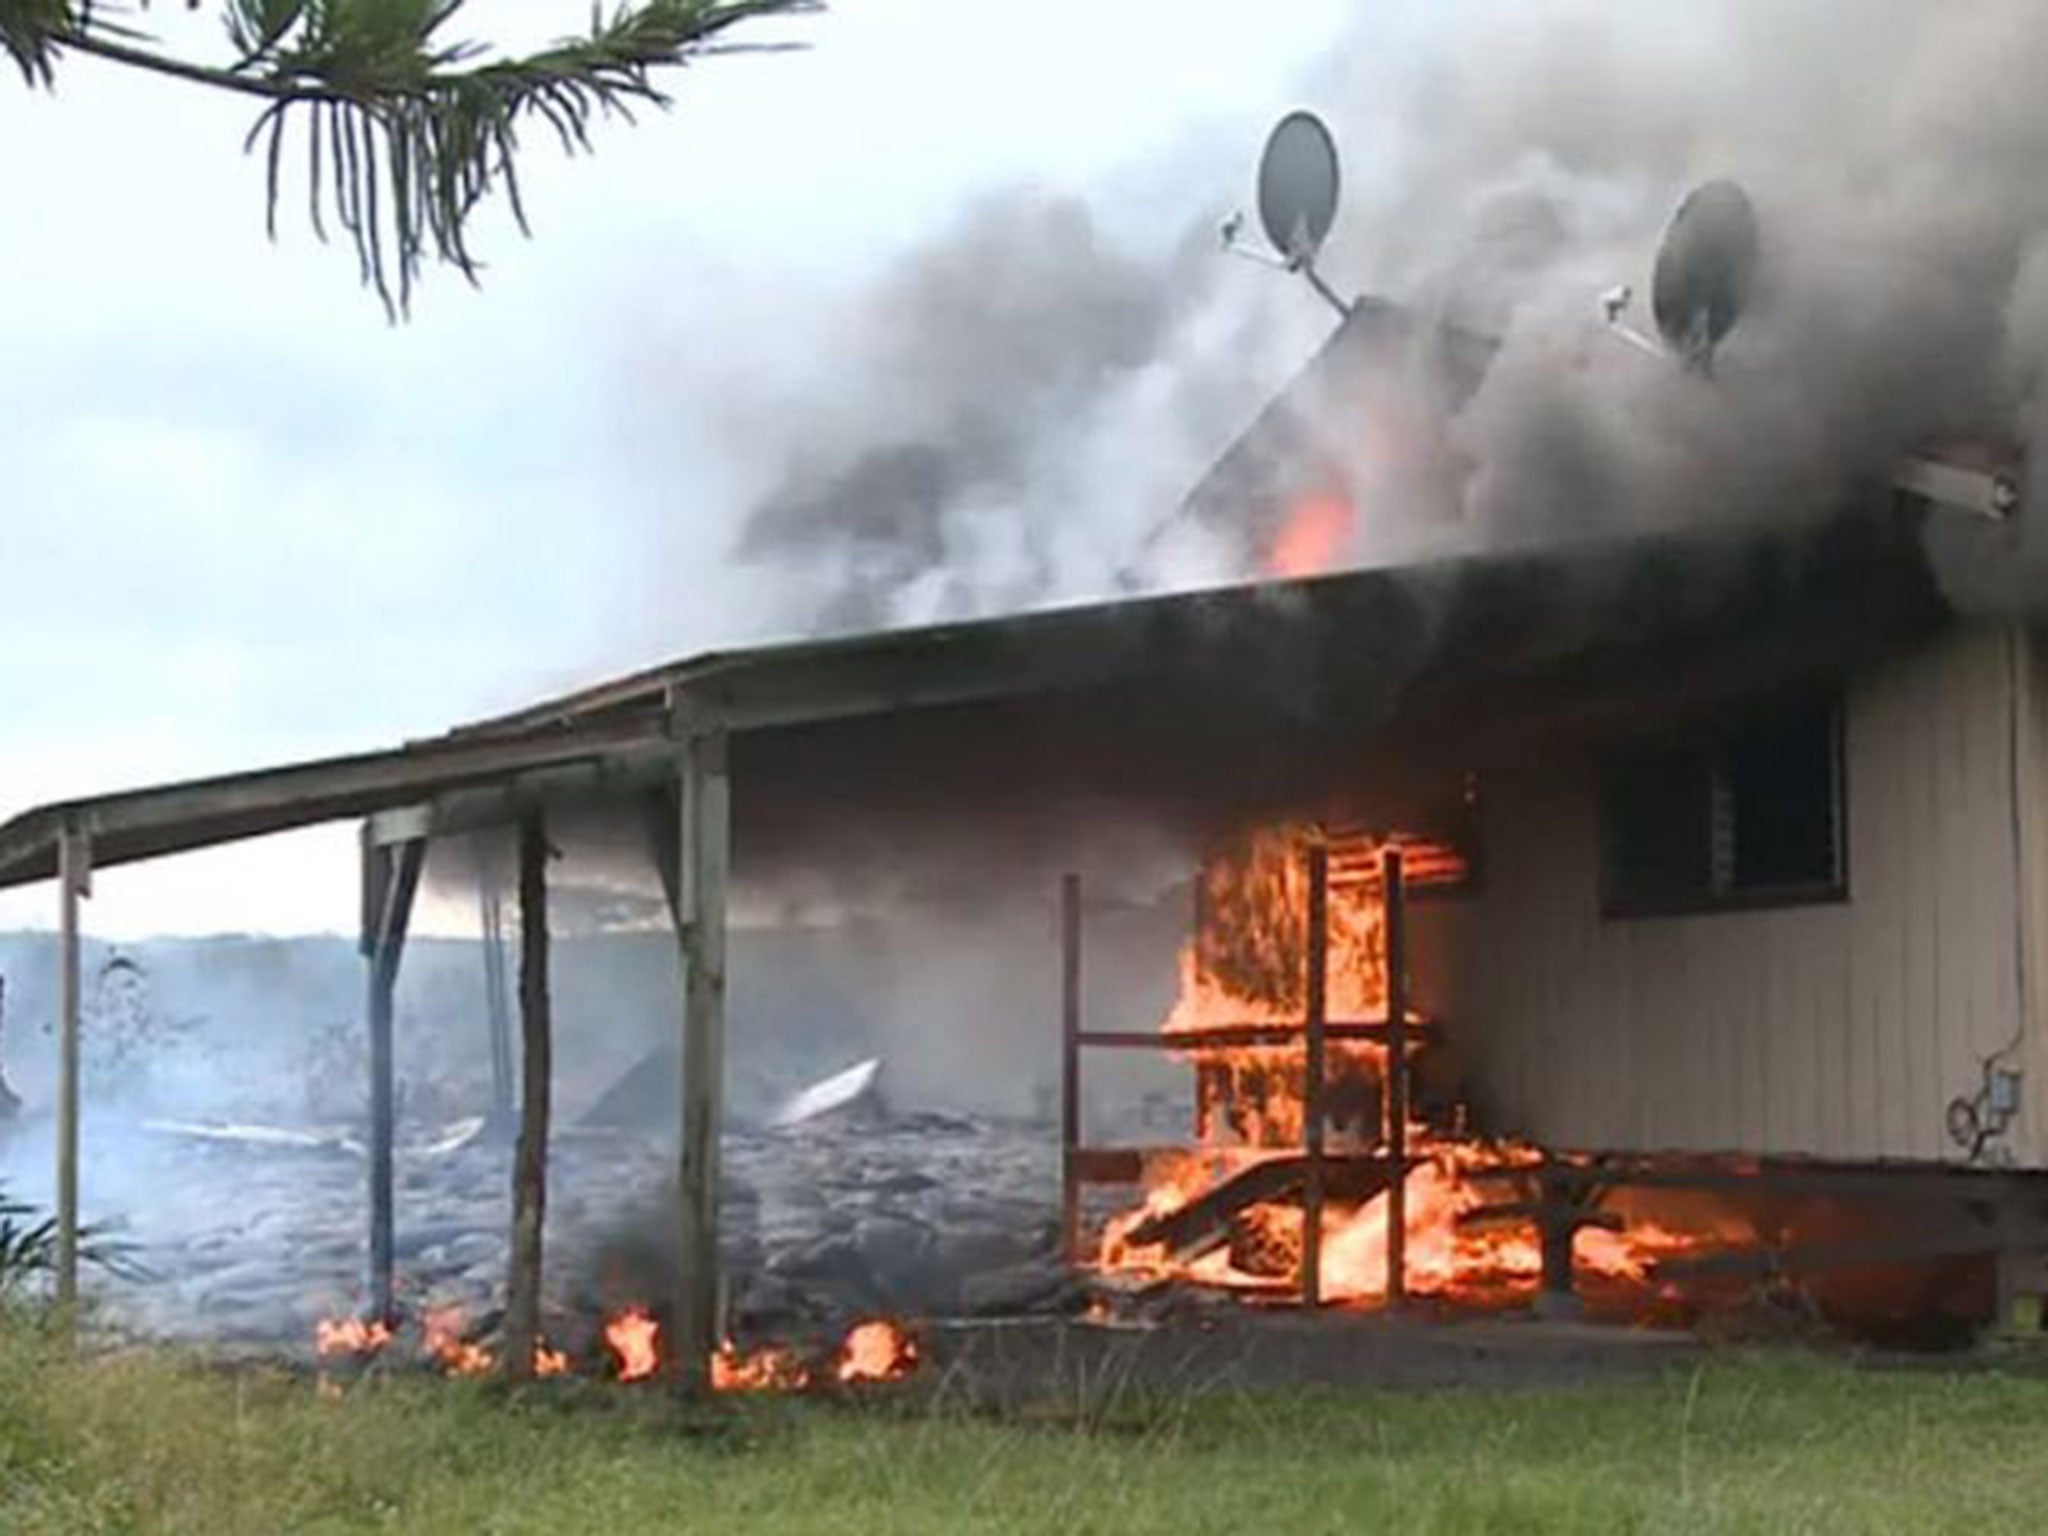 The first house was destroyed by the Kilauea volcano lava flow on 10 November